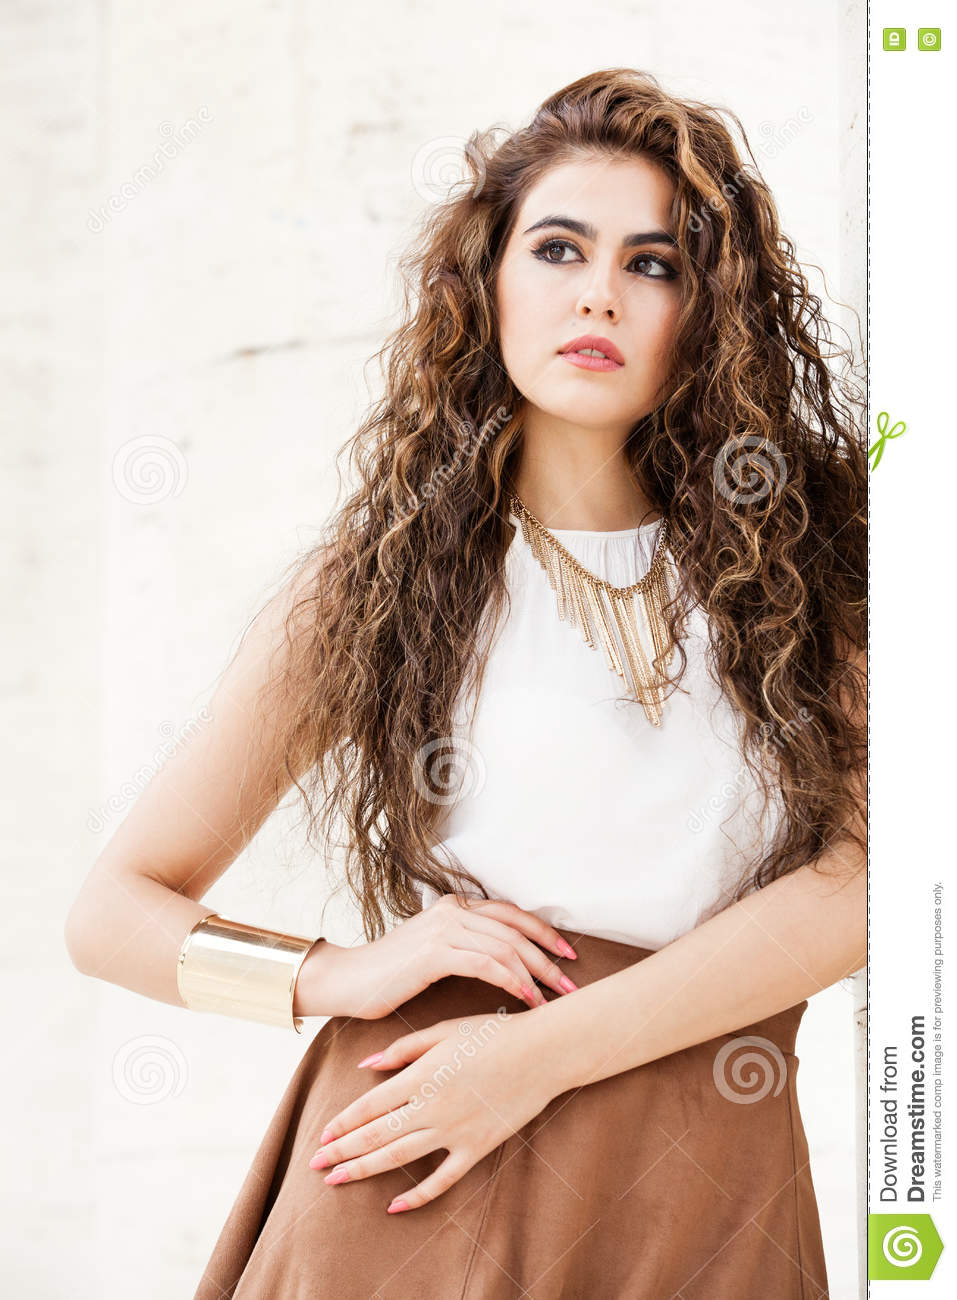 Beautiful woman with curly hair outdoor. Makeup A beautiful and happy young woman. Portrait of a girl with curly hair. Side look. Makeup on her face, perfect style. White sleeveless T-shirt, brown skirt, necklace and bracelet. Accessories. Sensuality, freshness, beauty and emotions.